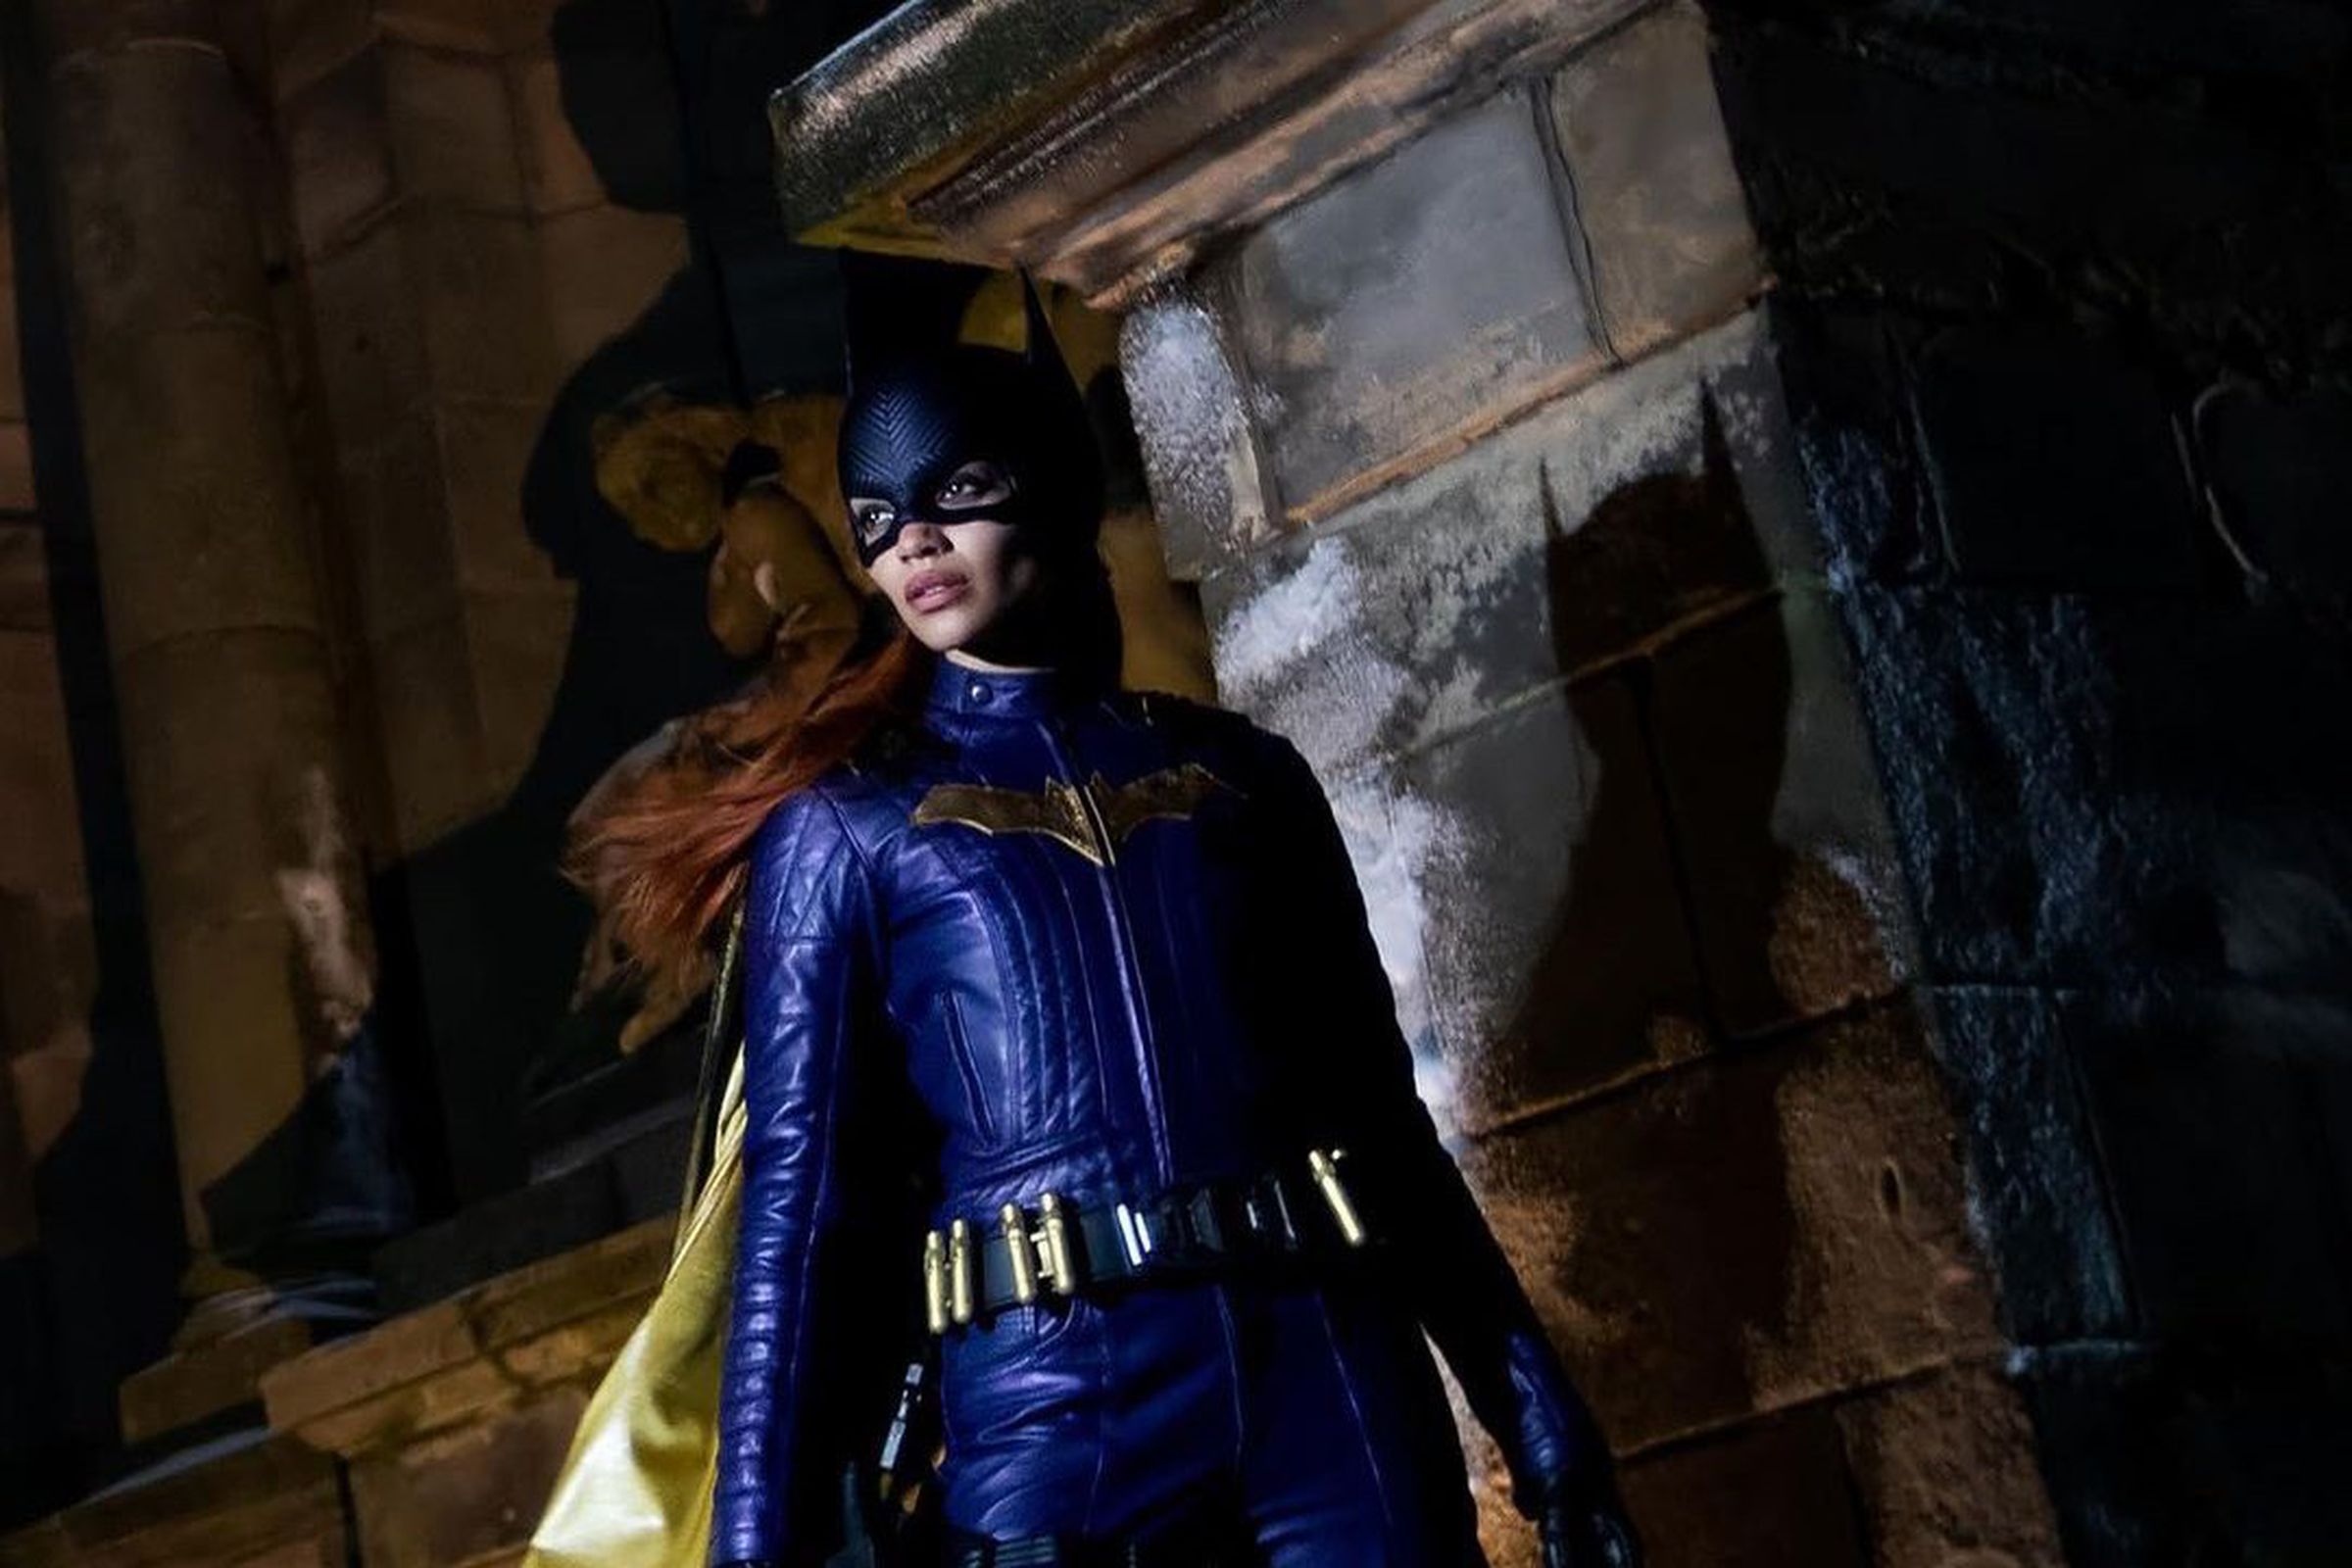 Leslie Grace is wearing a red wig and a purple Batgirl costume and mask. She appears to be standing on a rooftop.